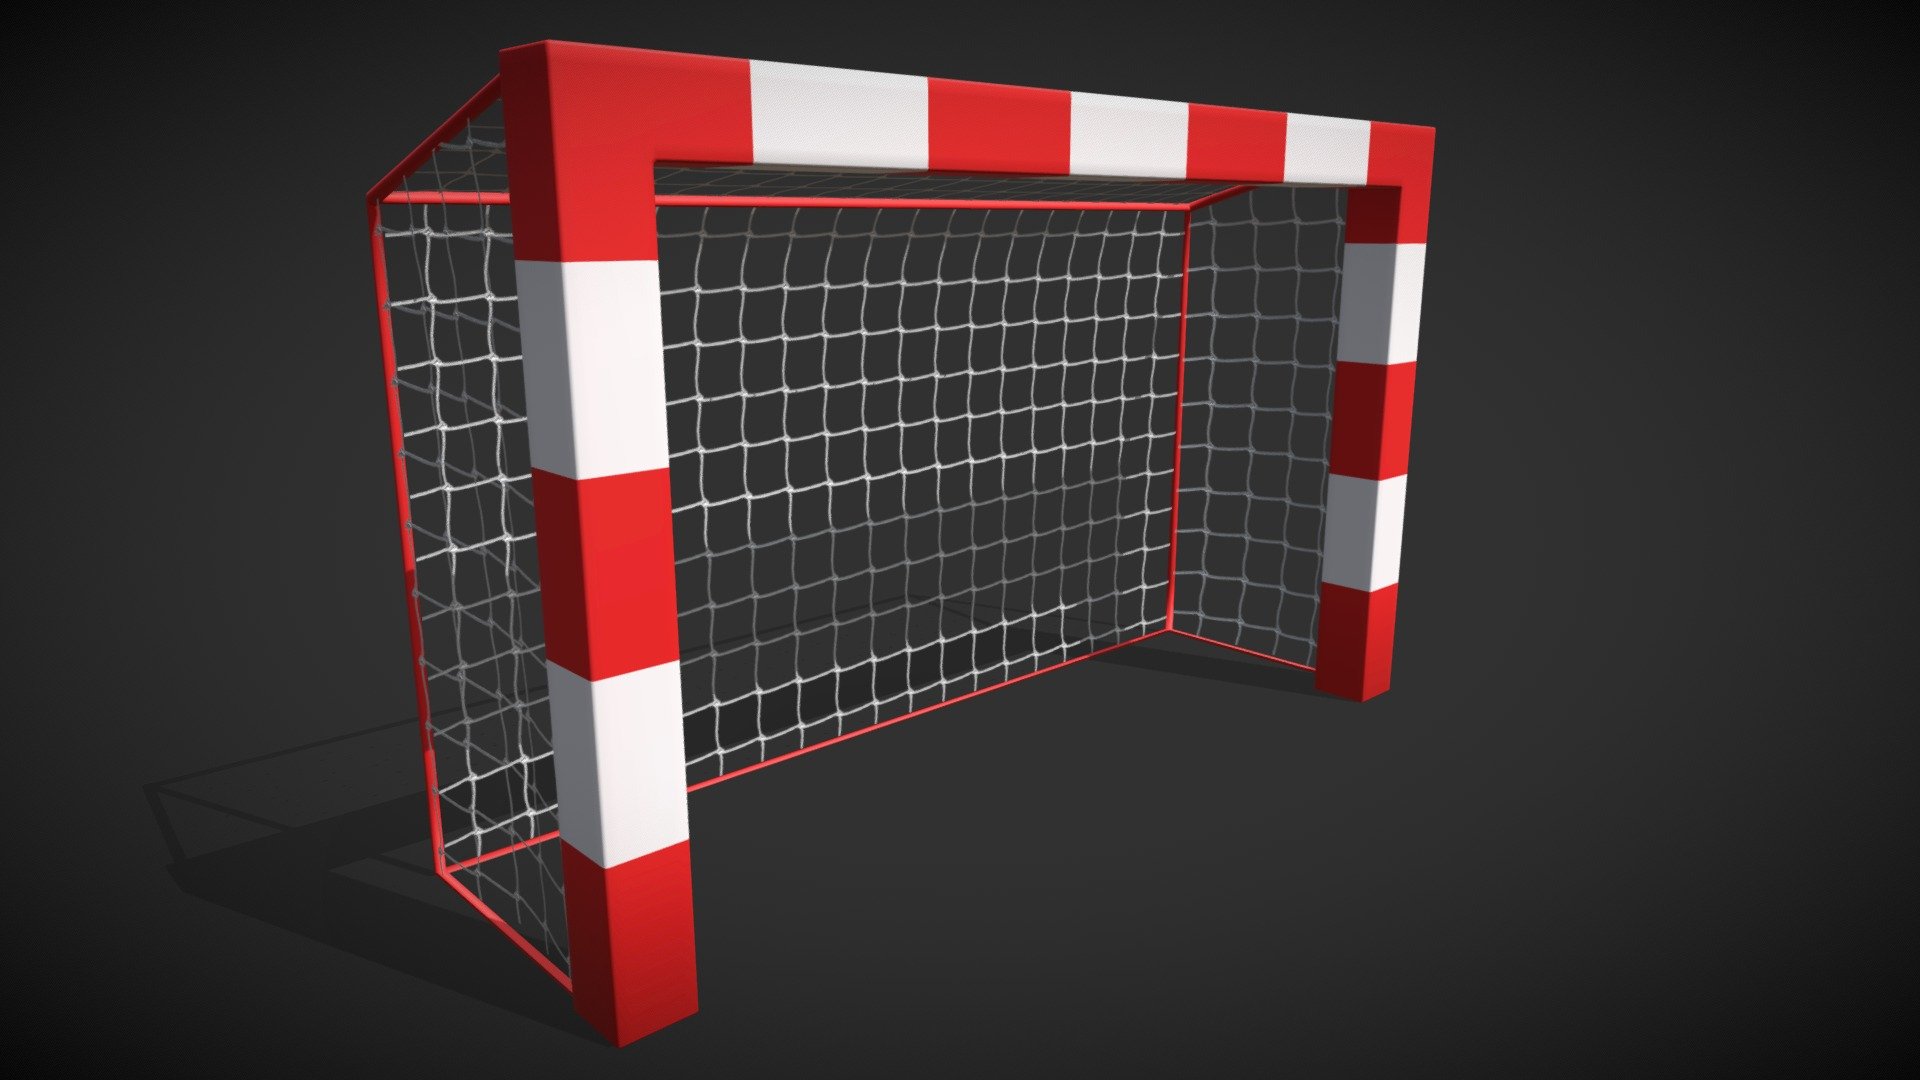 Low poly Fbx with tilded textures.
Scale: 316cm x 200cm
It is created in 3ds max 2022 and the net has texture on both sides.
The materials are created in photoshop.
Net: BaseColor &amp; NormalMap 504x544 PNG
Goal: BaseColor: 72x72 PNG - Soccer Goal Low-Poly - 3D model by SergioSanvi 3d model